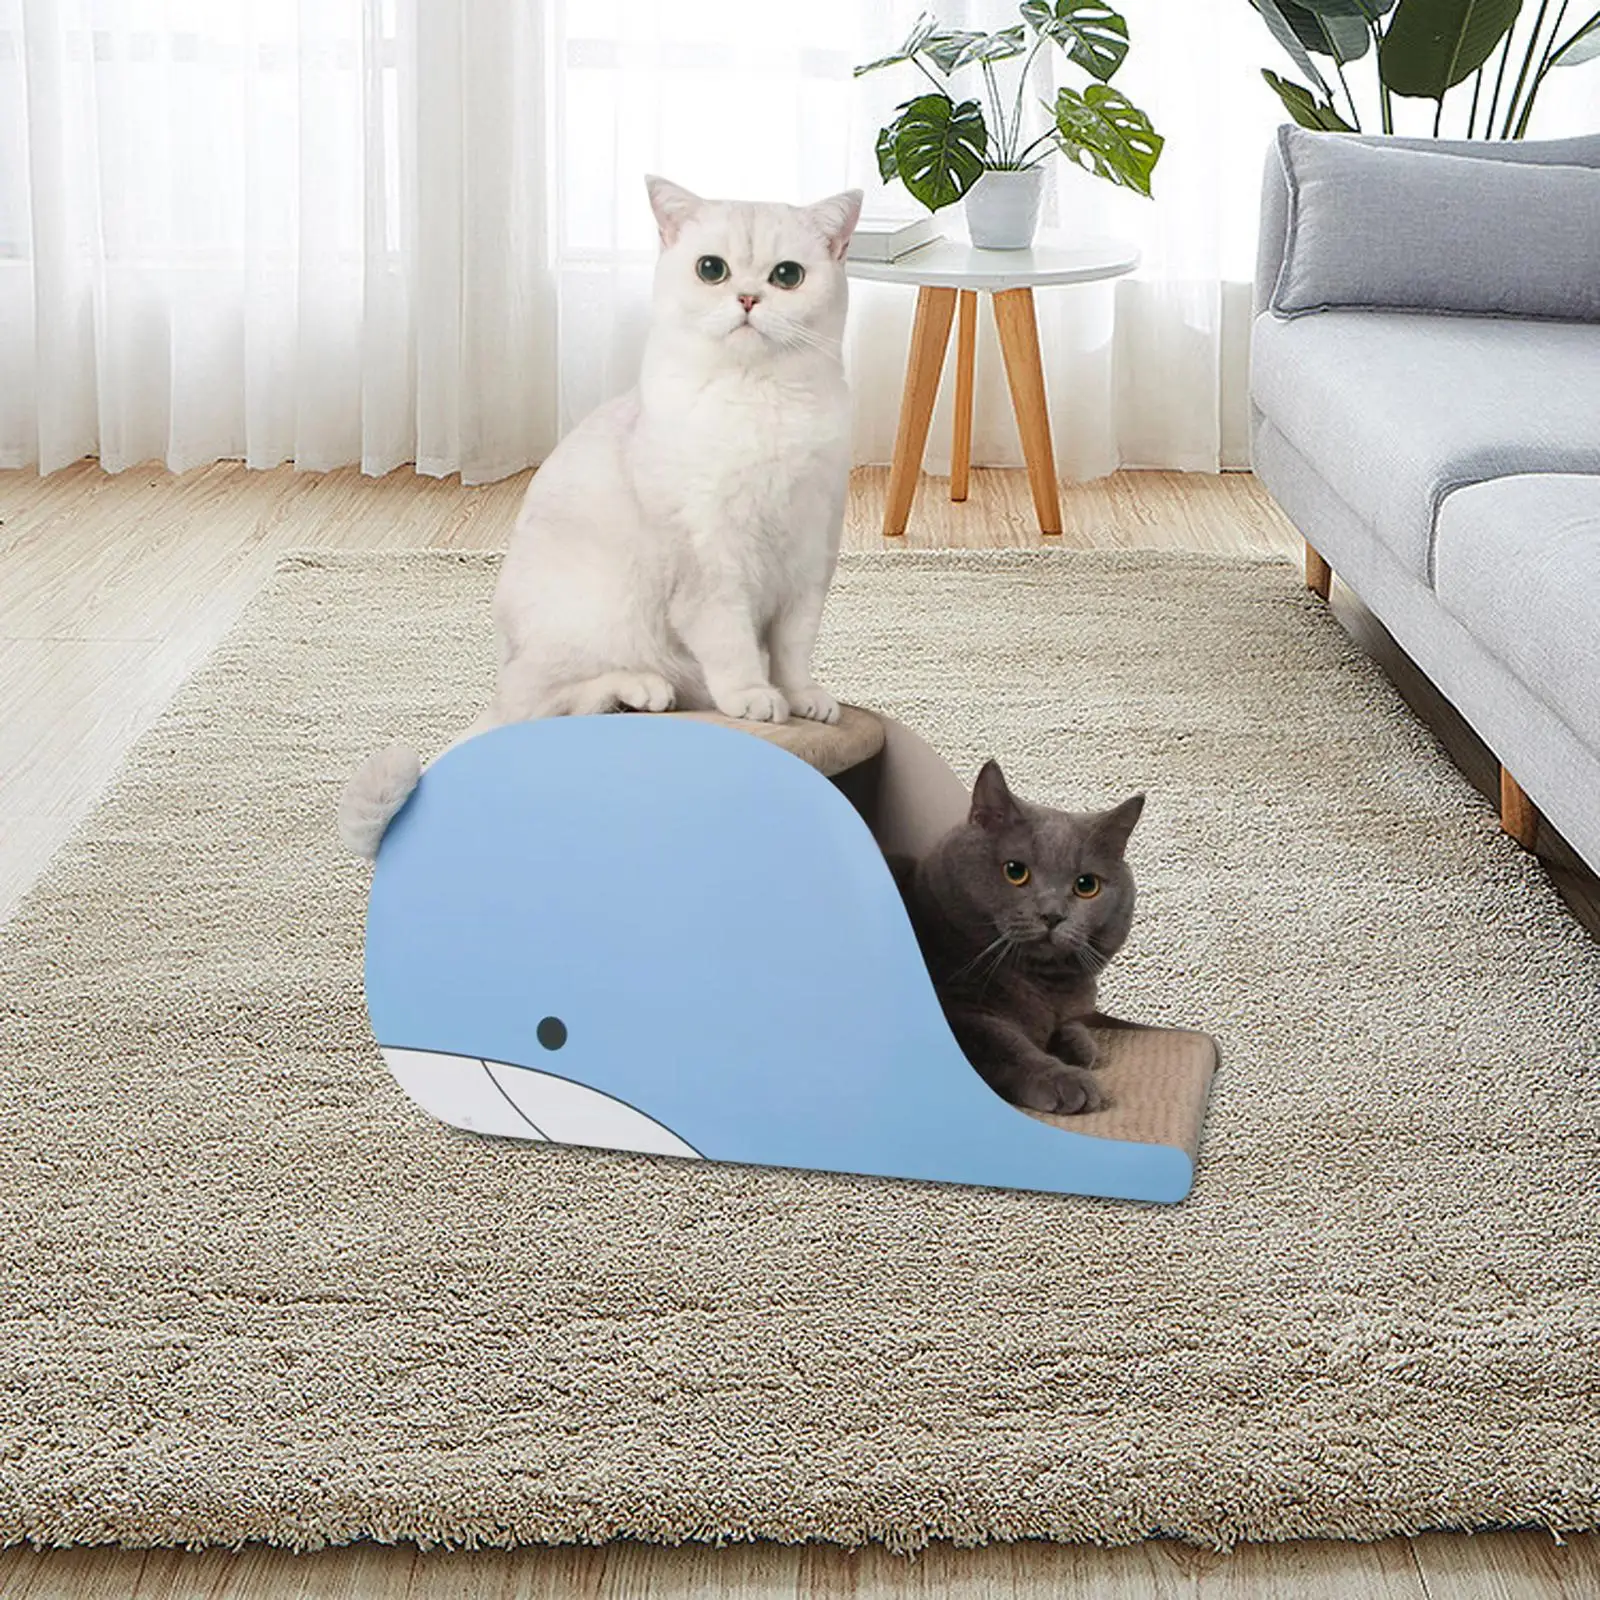 Cat Scratch Pad Nest Interactive Play Toy Cat Scratching Lounge Bed Grinding Claw Prevents Furniture Damage Kitten Cat Scratcher